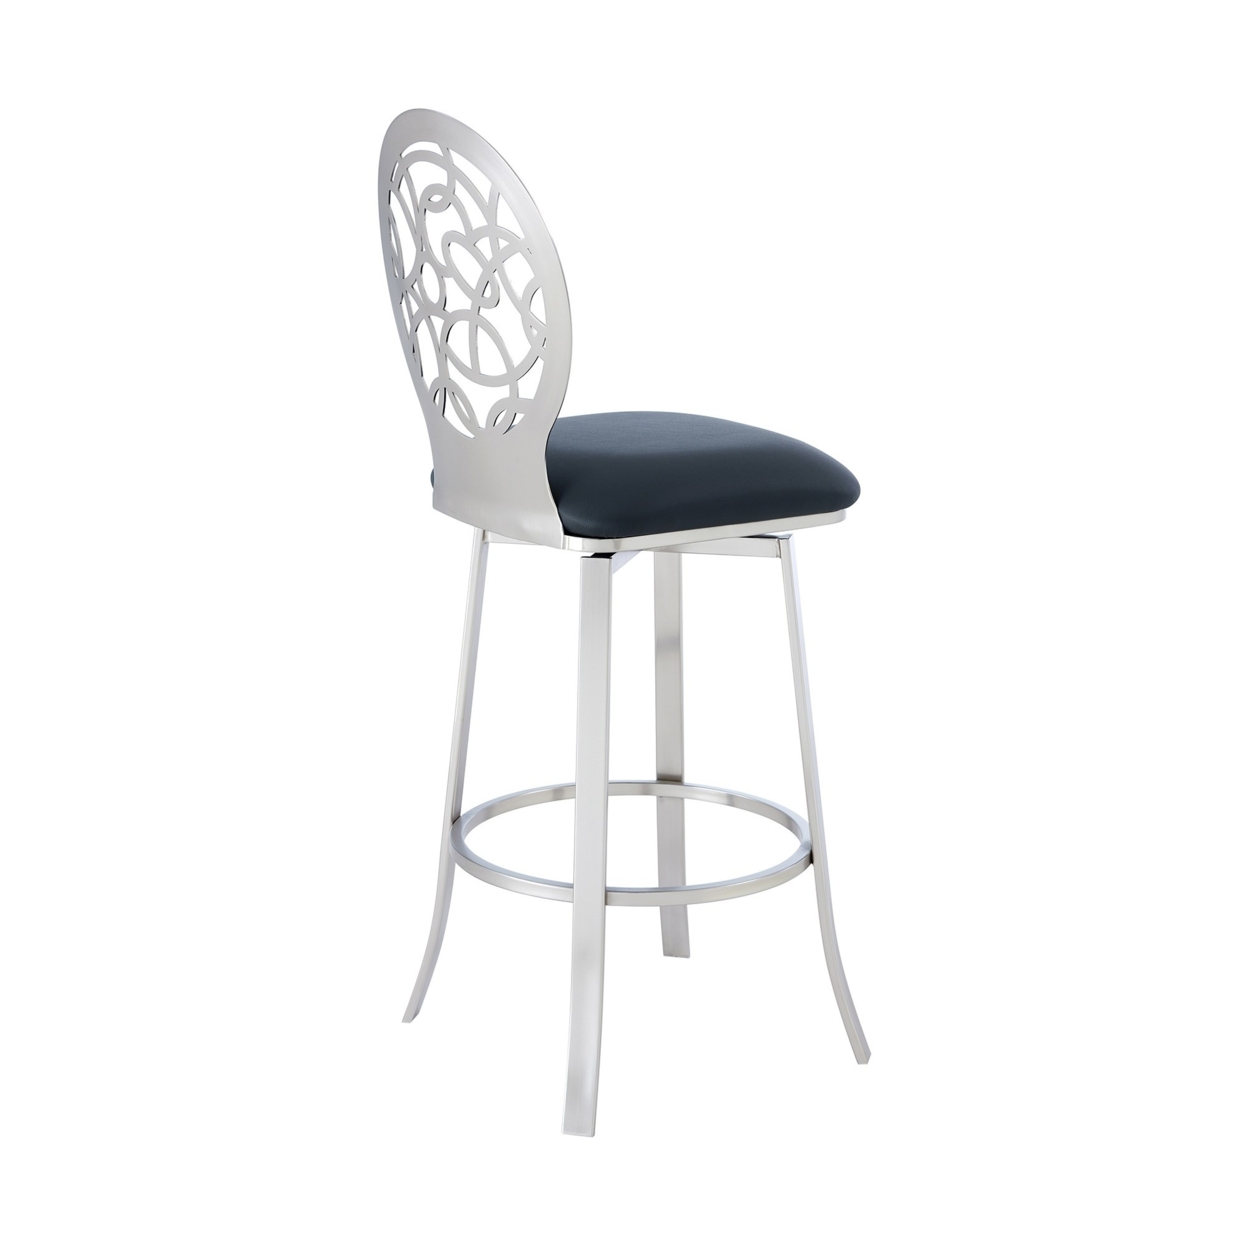 30 Inches Leatherette Barstool With Geometric Backrest, Silver- Saltoro Sherpi